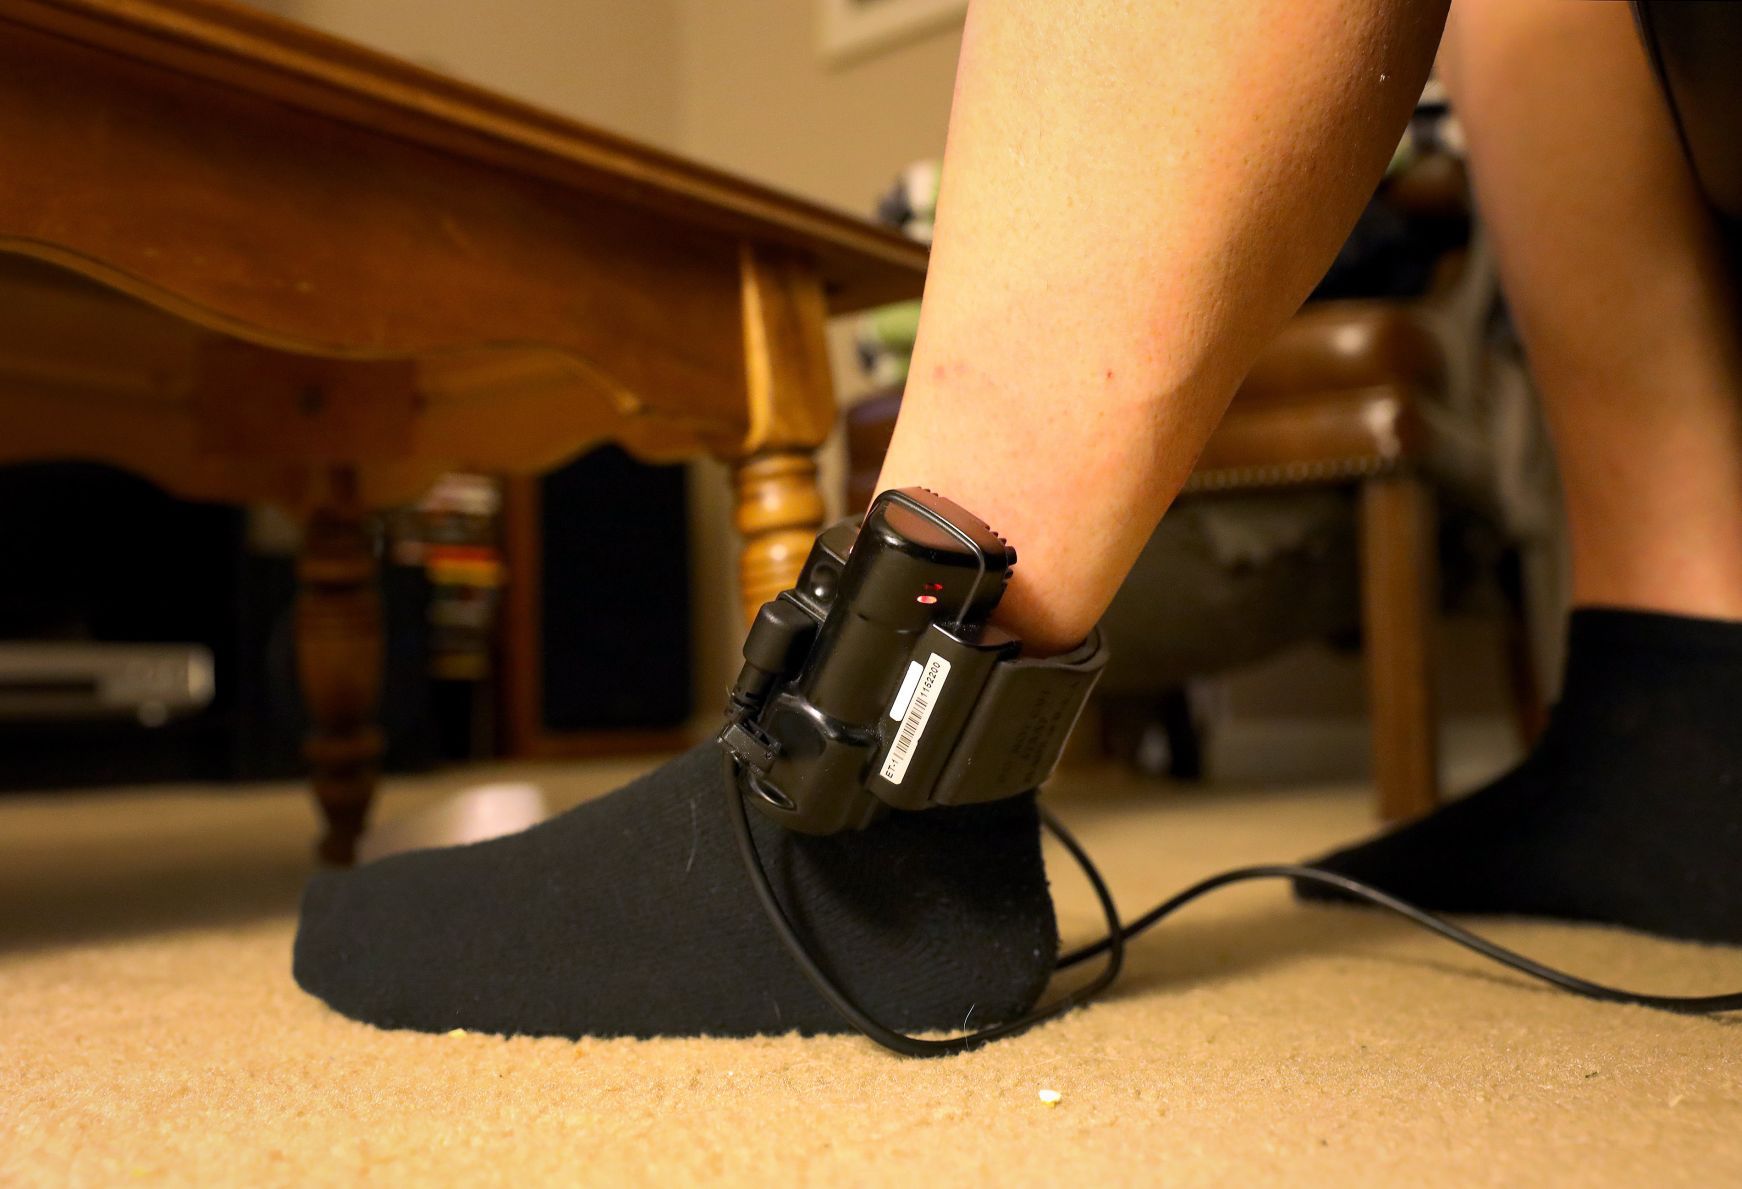 Ankle Bracelets Could Help Cut Hawaii Prison Costs And Overcrowding -  Honolulu Civil Beat